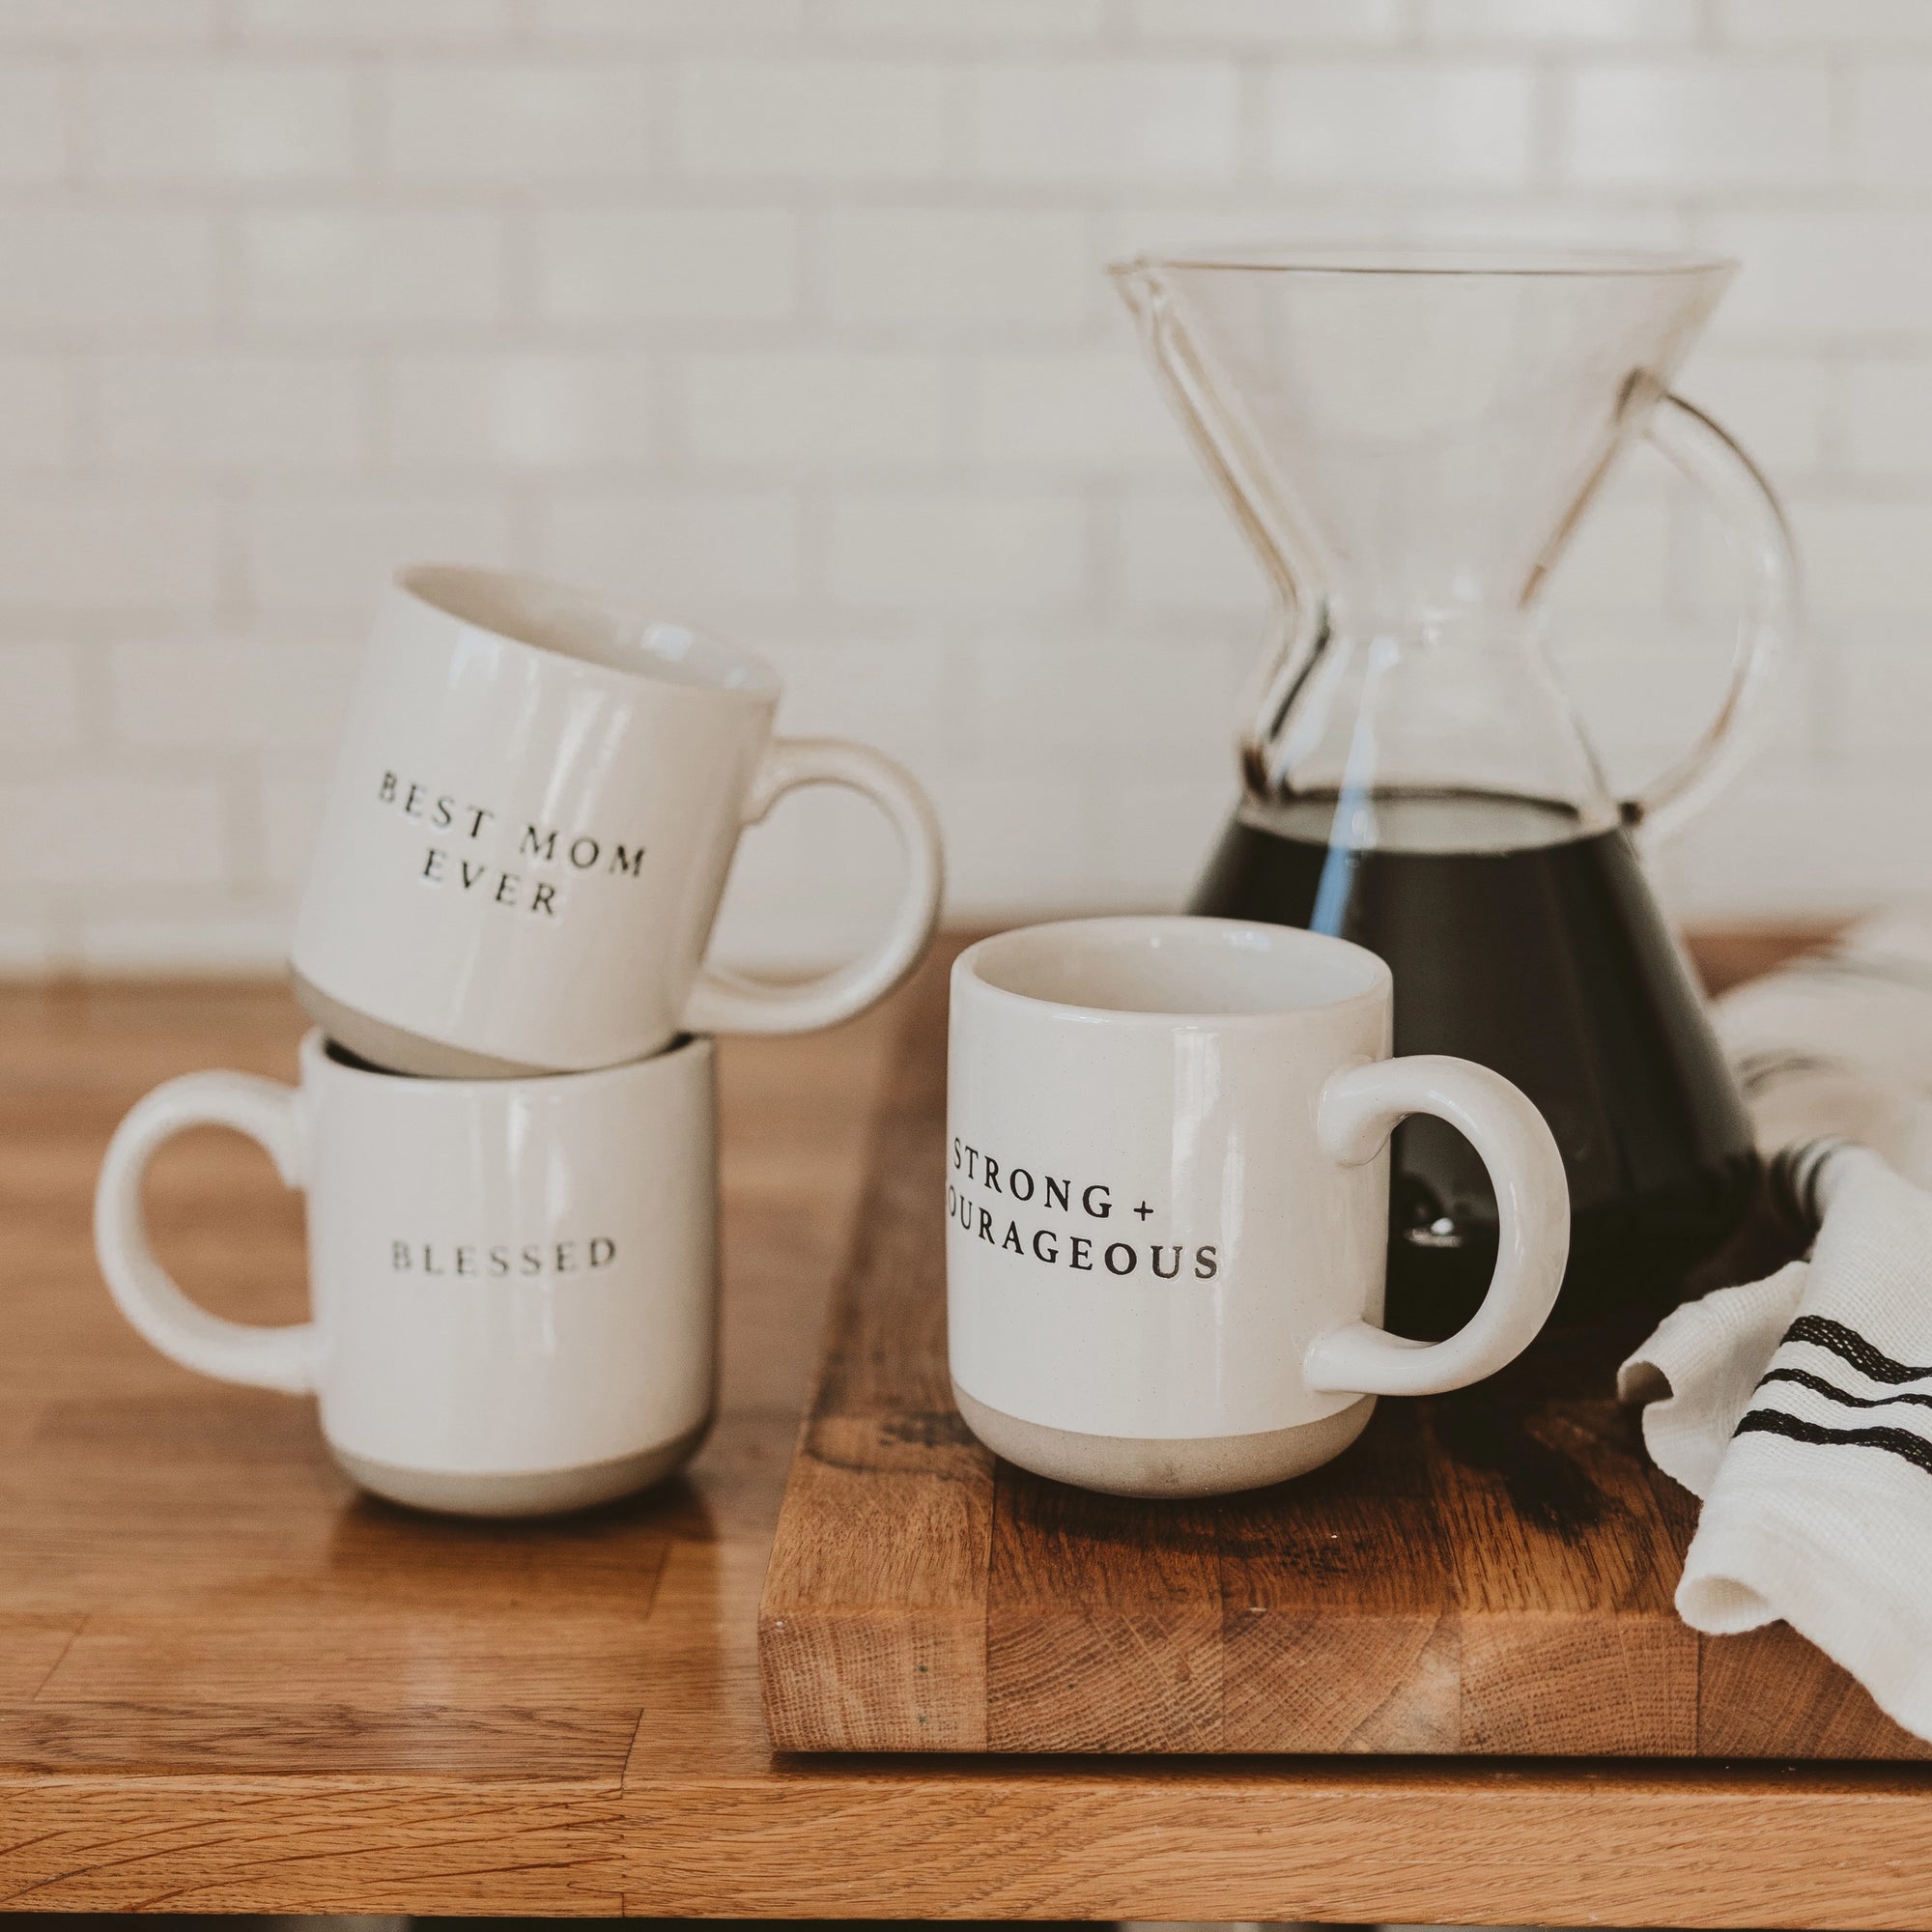 Selection of white and neutral brown stoneware mugs with slogans in black text, in front of cafetiere.